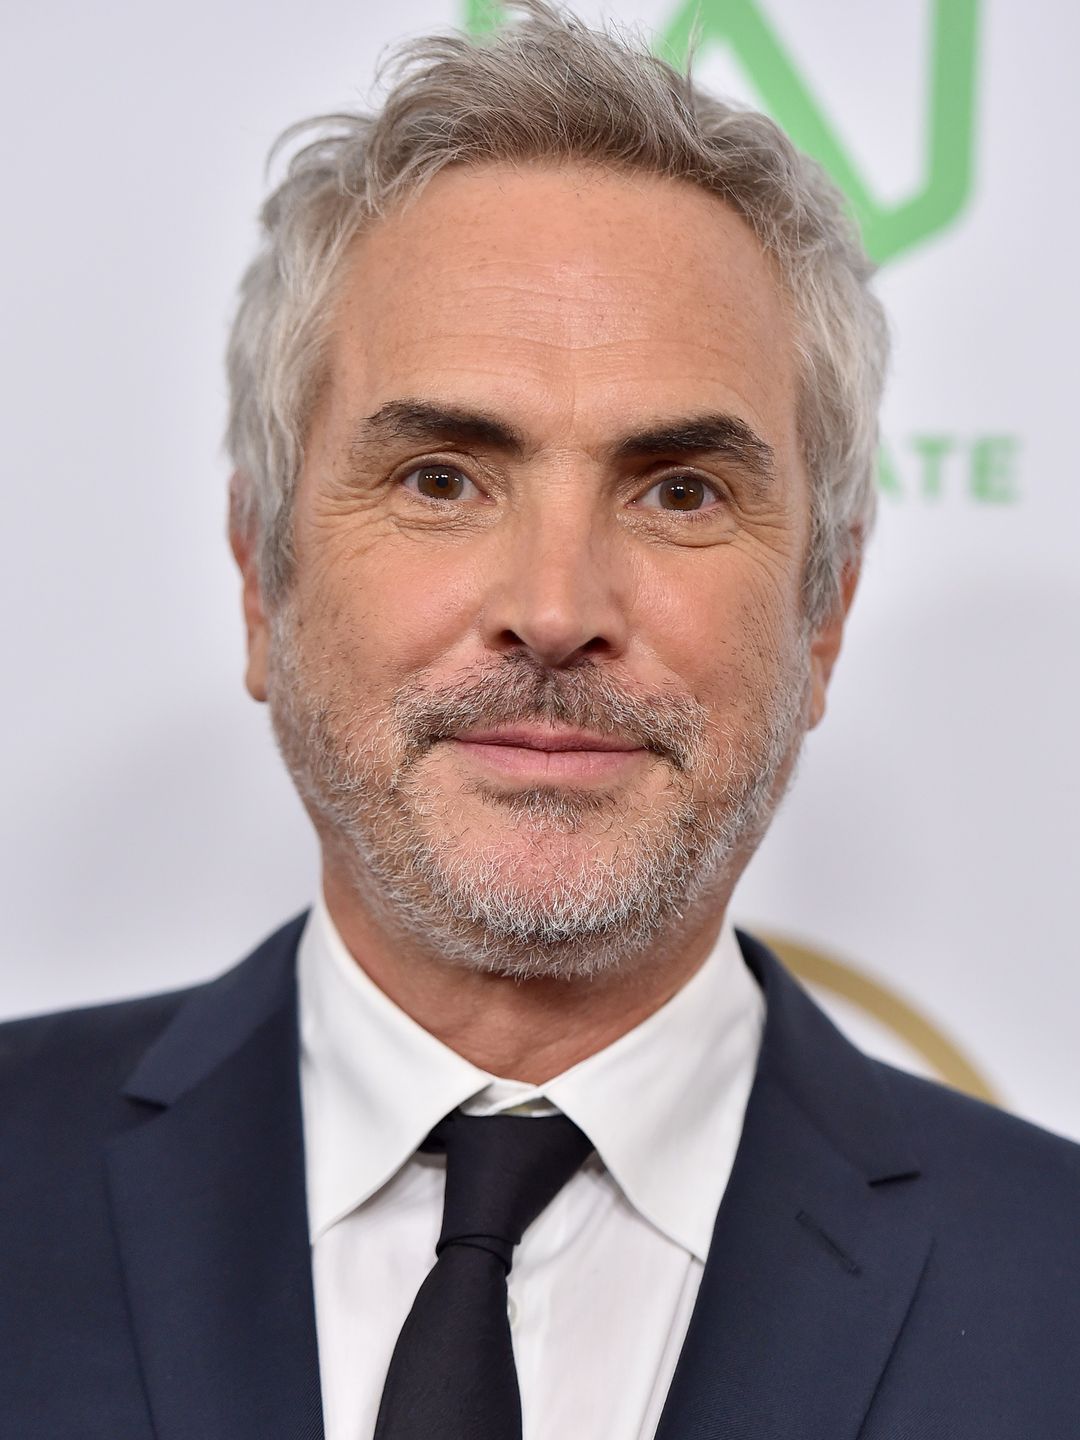 Alfonso Cuarón how did he became famous